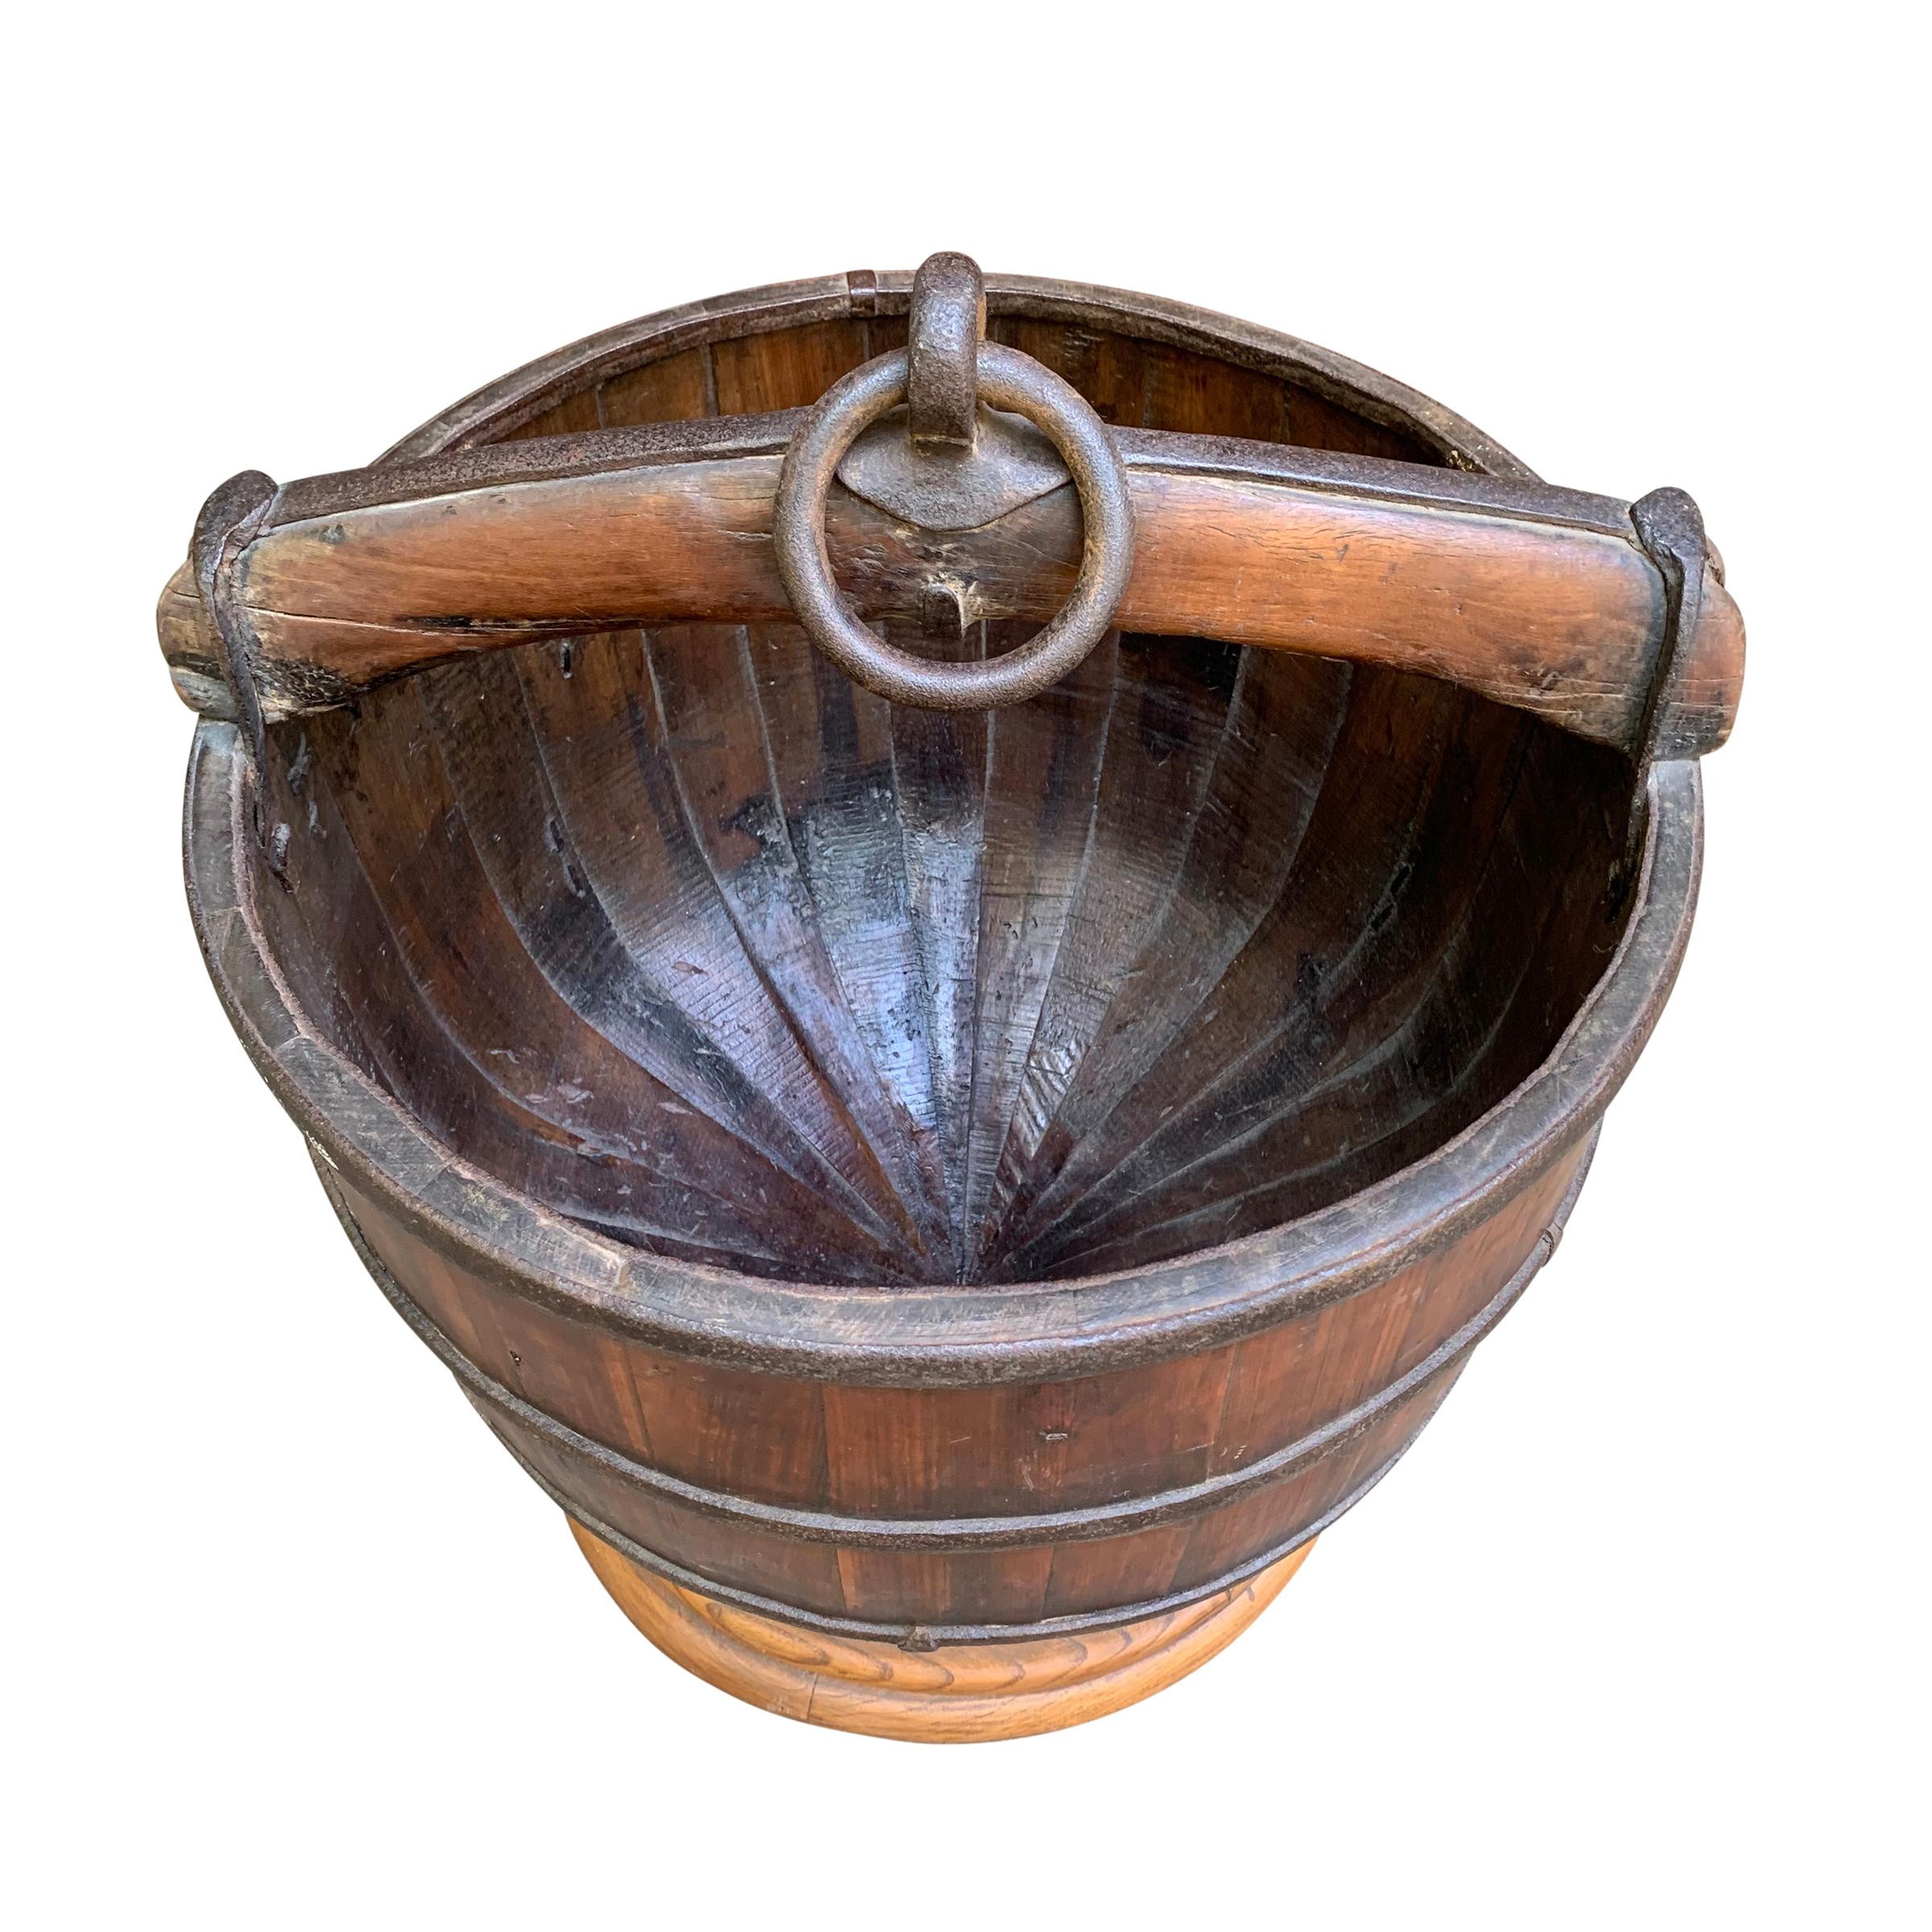 A fantastic 19th century Chinese wooden water bucket with beautiful heavy iron straps and a handle with an in iron ring that was originally used to raise and lower the bucket. The bottom tapers so a turned wood stand was created so that the piece